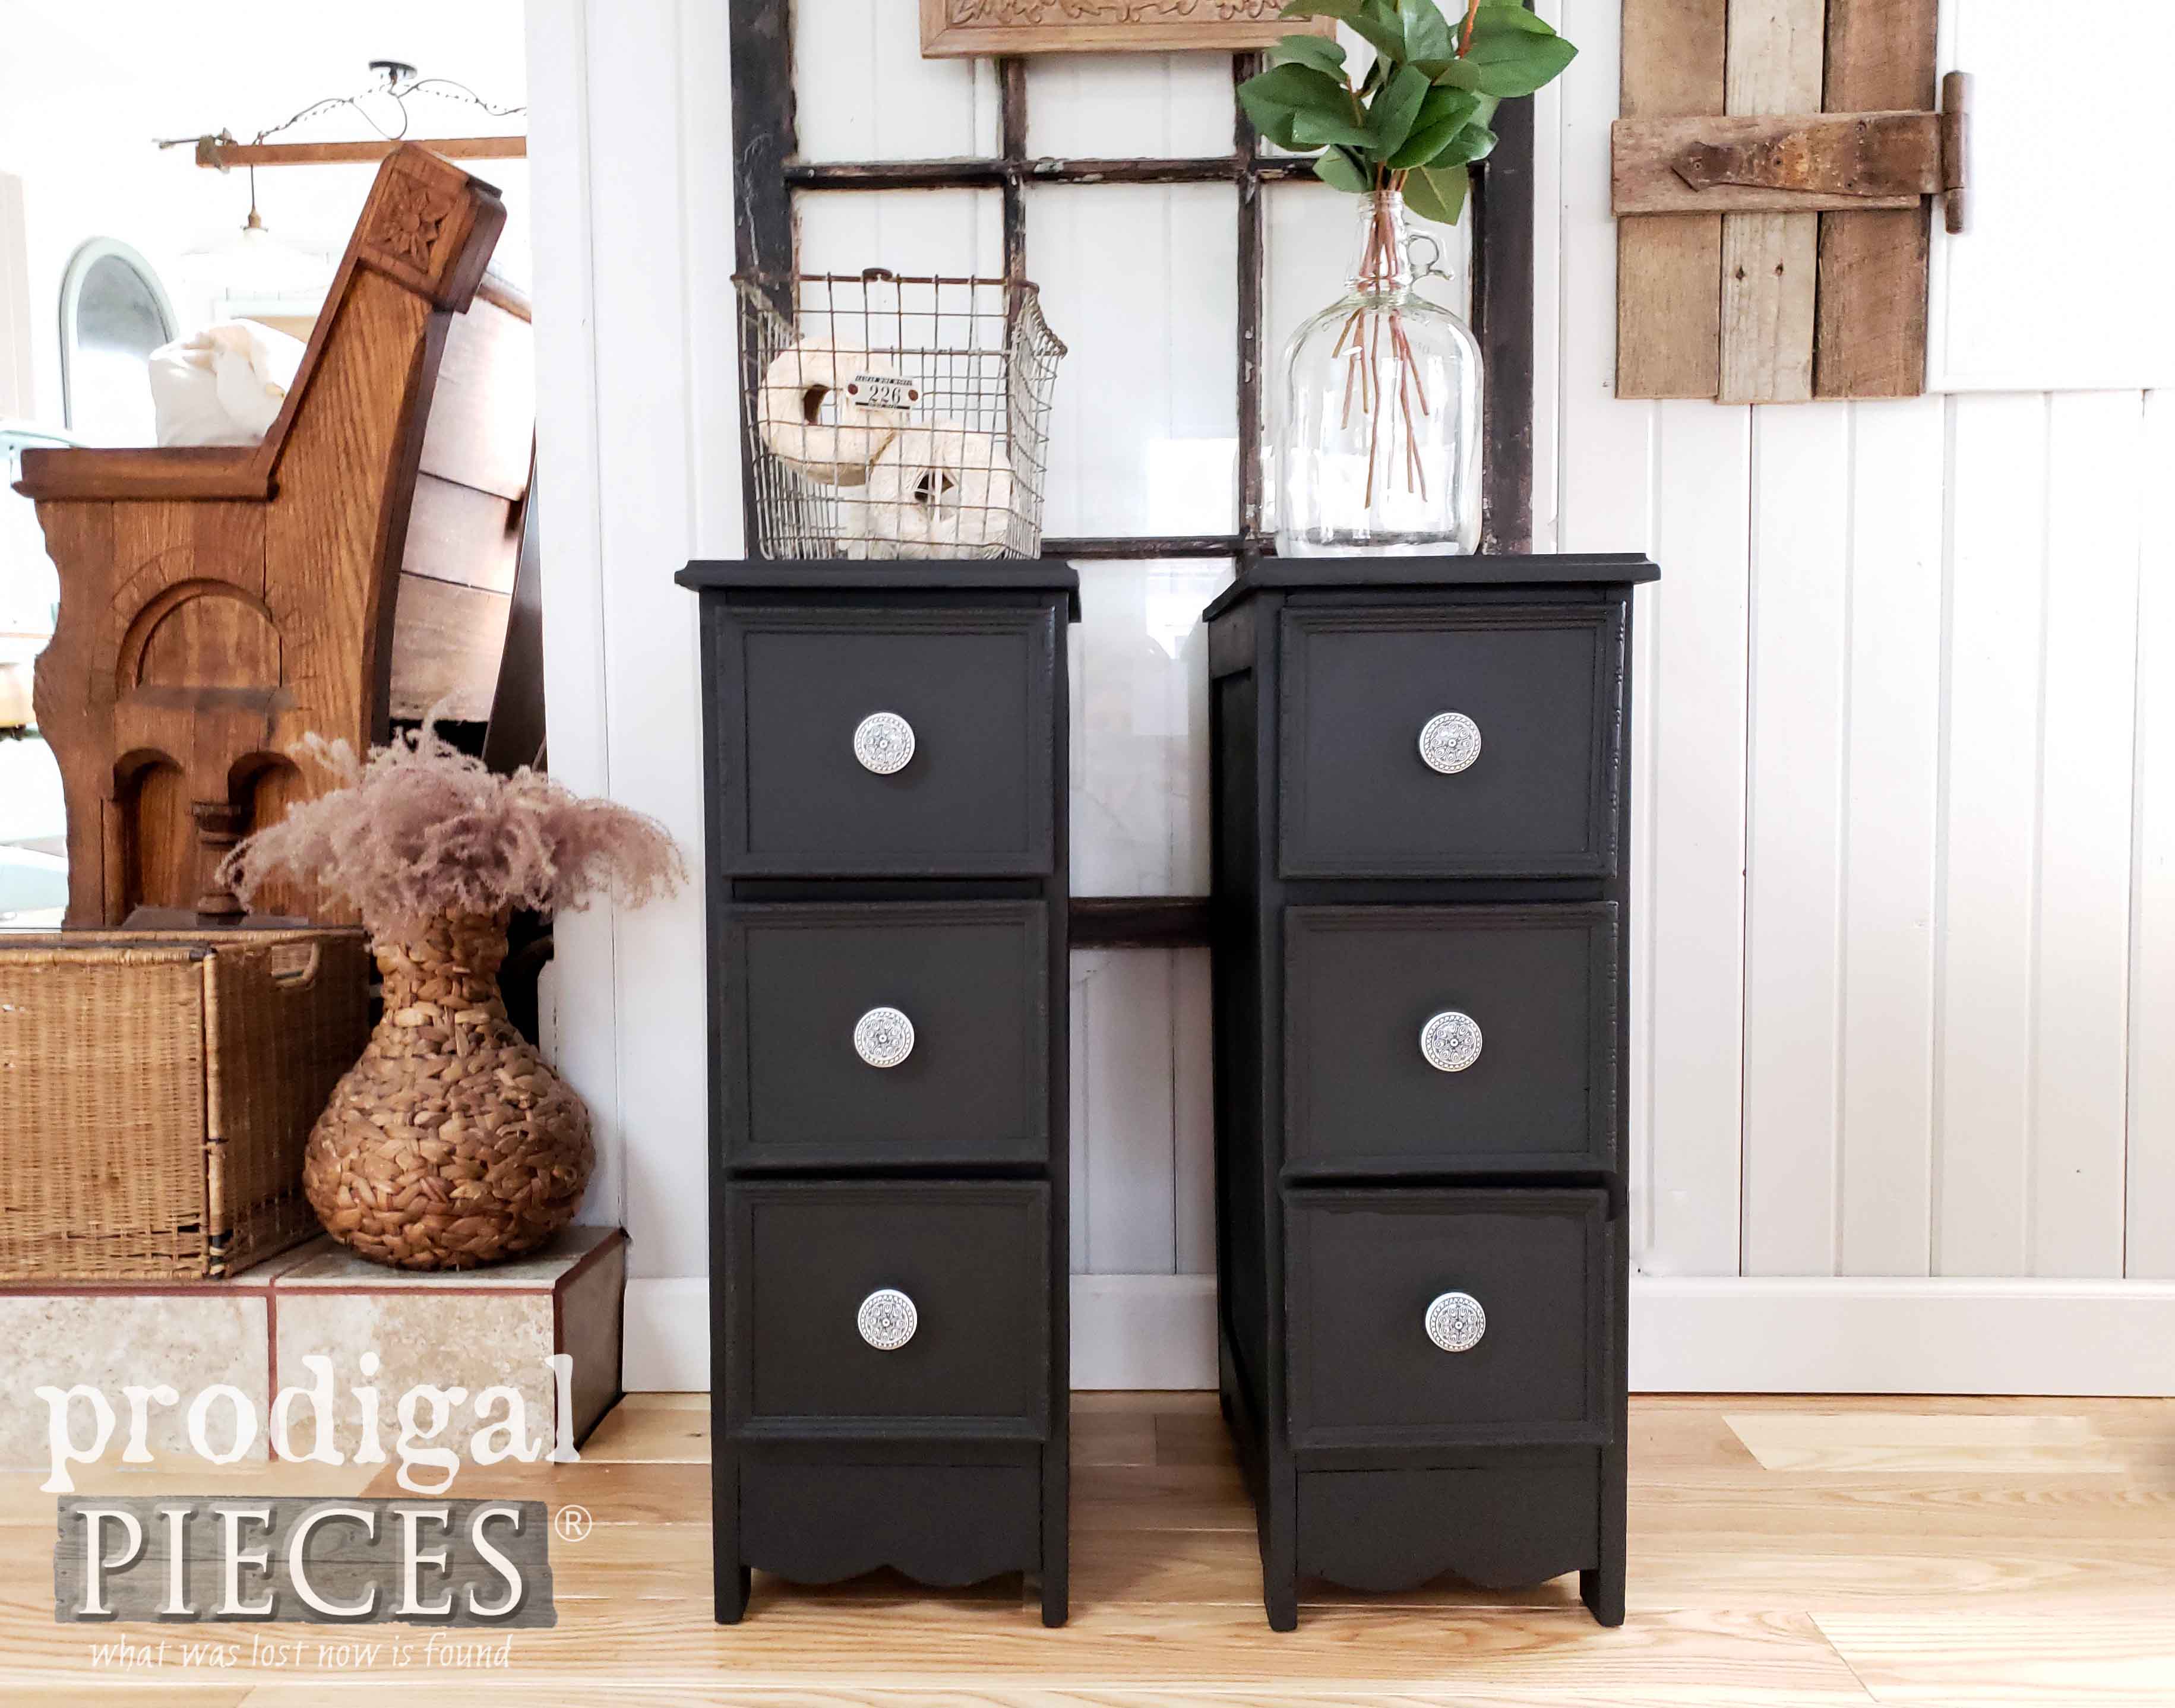 Set of Vintage Farmhouse Nightstands Created by Larissa of Prodigal Pieces | Full Video Tutorial at prodigalpieces.com #prodigalpieces #diy #home #farmhouse #furniture #homedecor #videos #homedecorideas #vintage